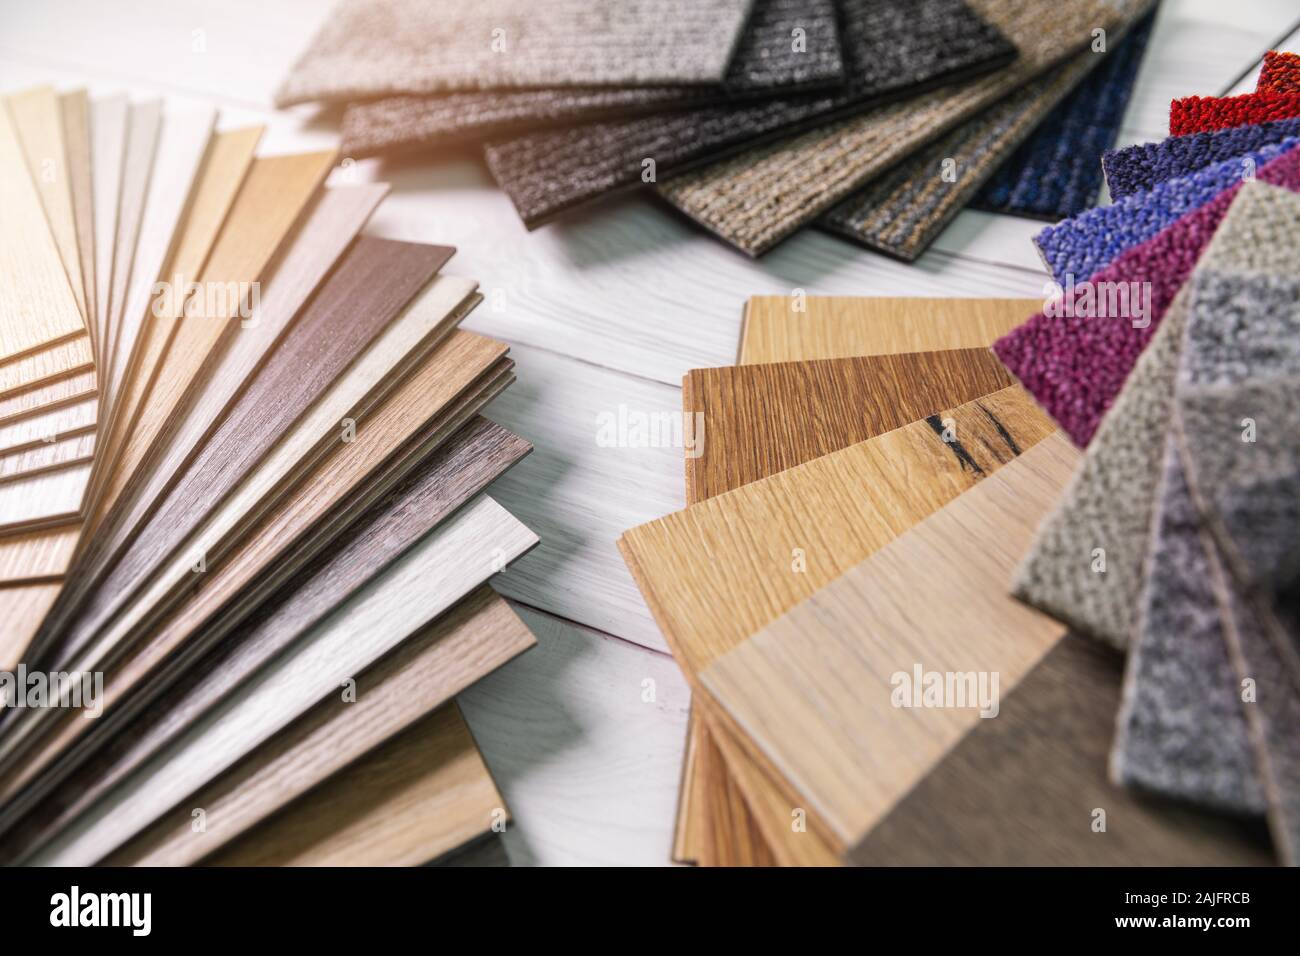 flooring and furniture materials - floor carpet and wooden laminate samples Stock Photo